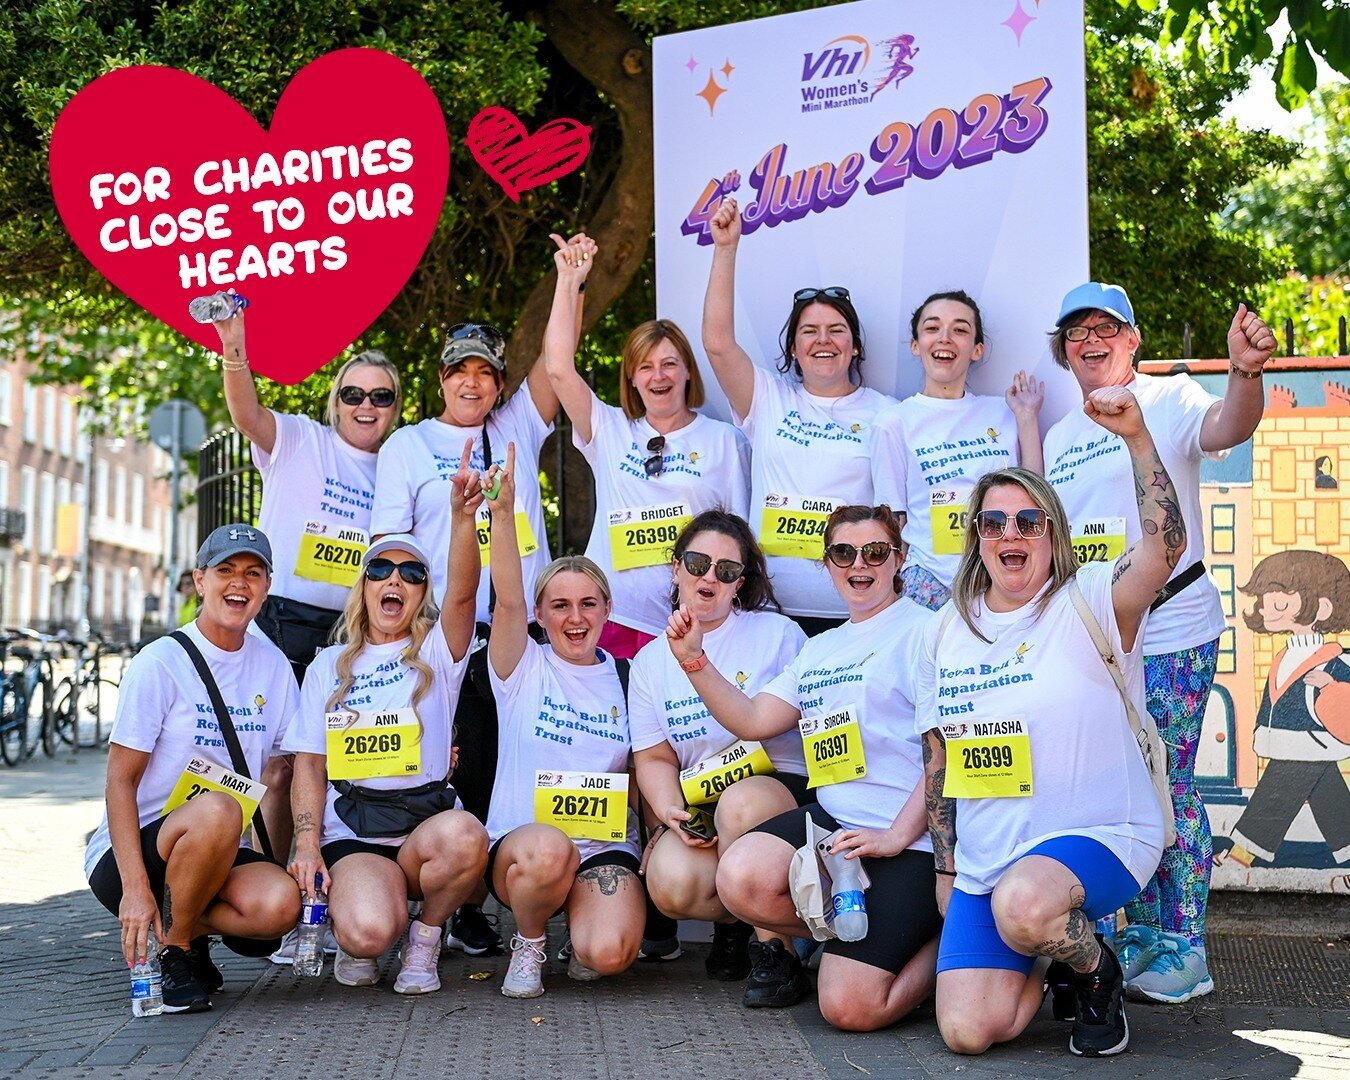 One of the many reasons that our participants join us every year is because of a charity close to their hearts. ❤️ Are you fundraising this year? Tag a charity close to your heart below!

#hearttoheart #VhiWMM #Dublin #Ireland #10k